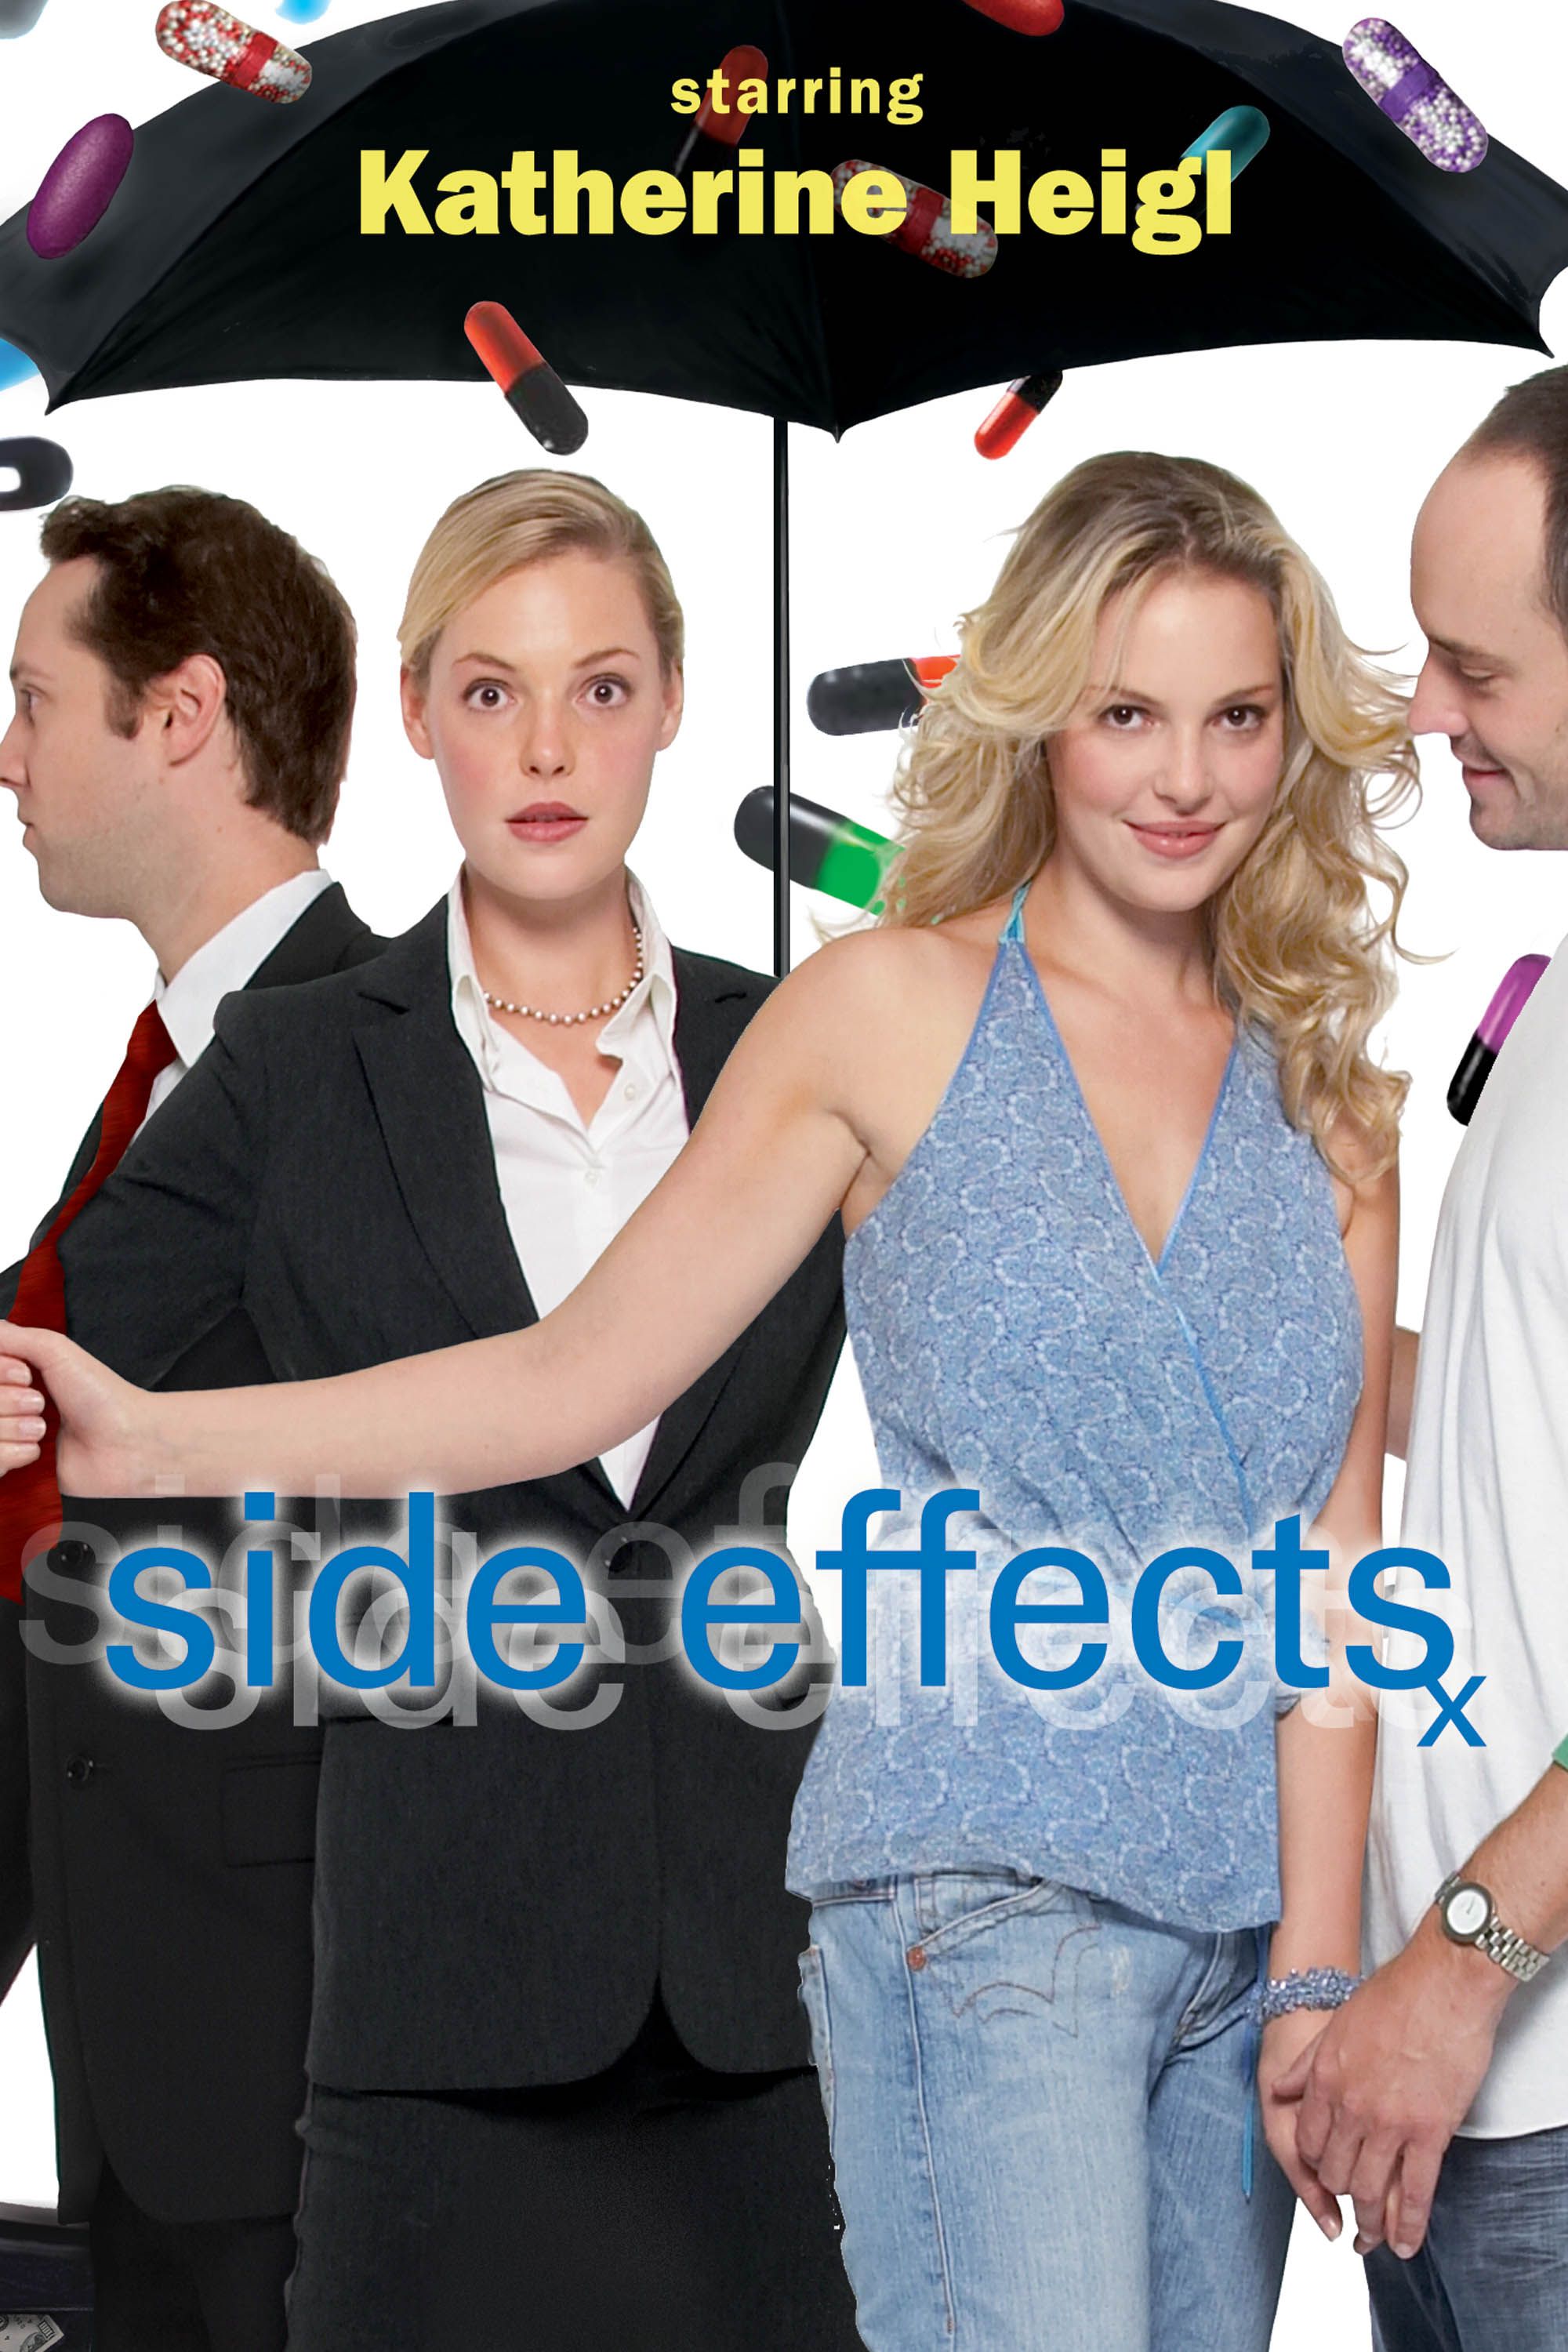 Side effects 2005 movie